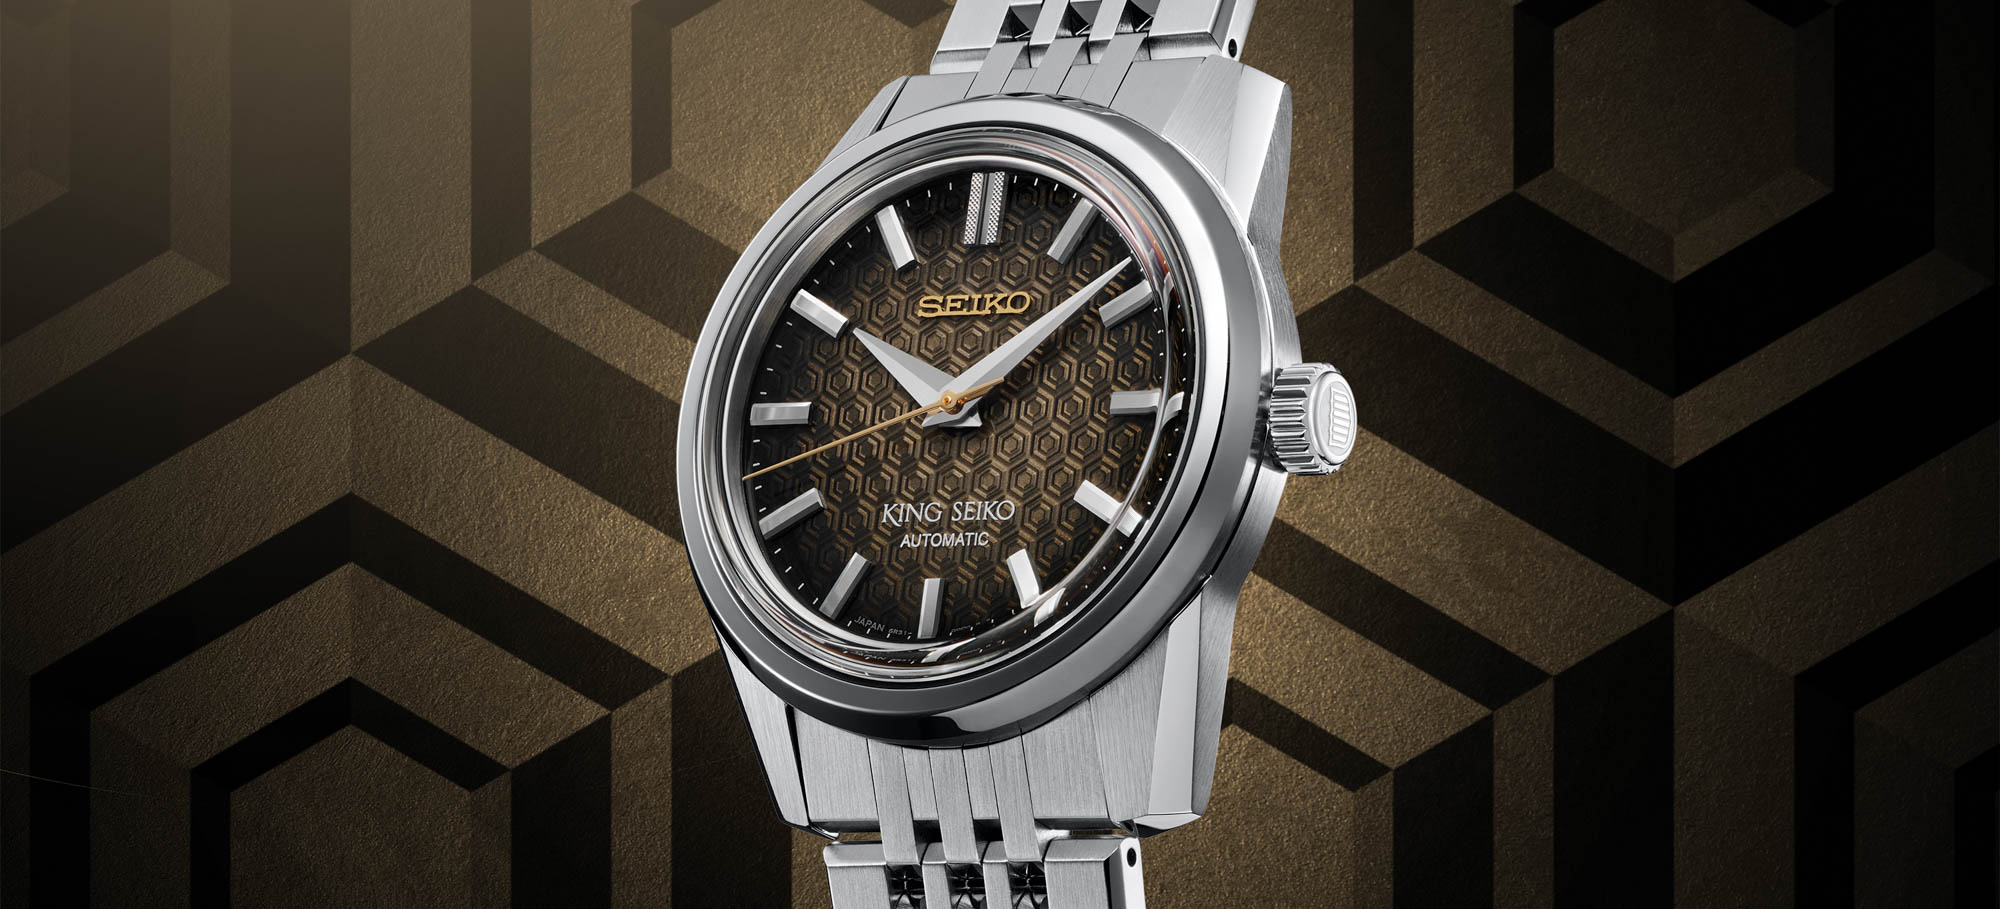 Seiko The Seiko Watchmaking 110th Anniversary King Seiko SPB365 Watch And New Core Collection 39mm Models | aBlogtoWatch